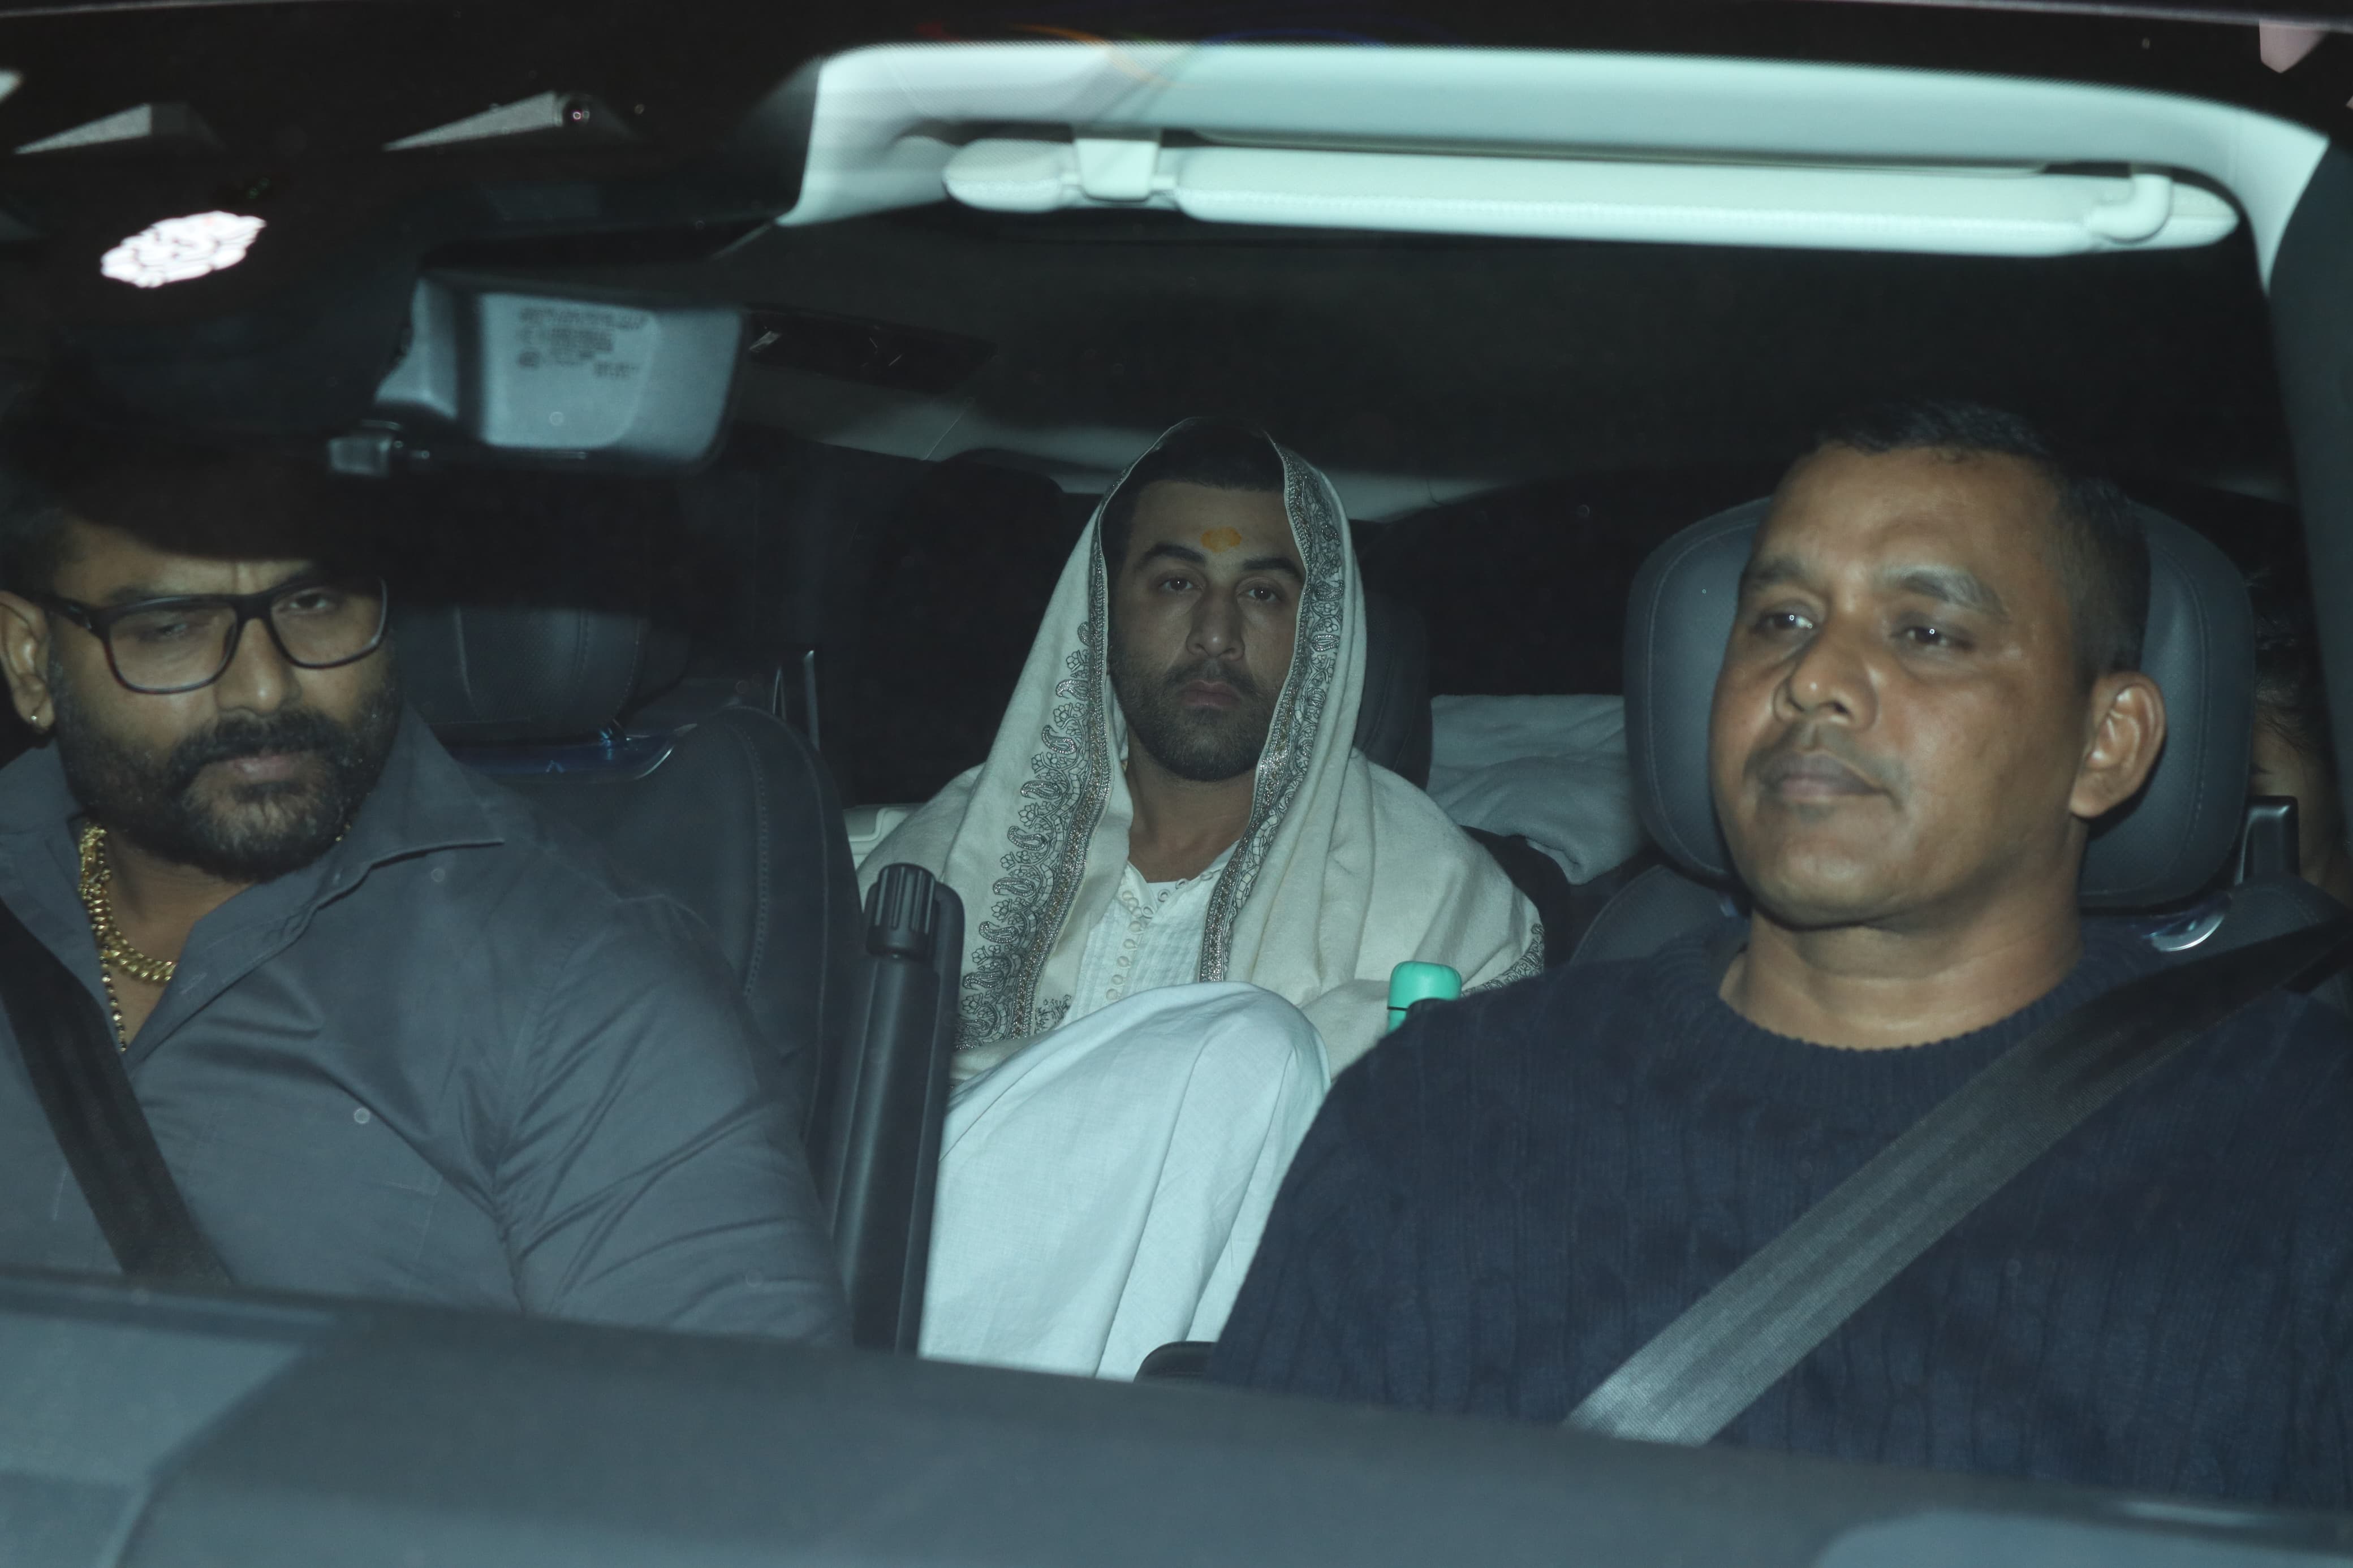 Ranbir Kapoor looked tired as he got clicked after returning from Ayodhya